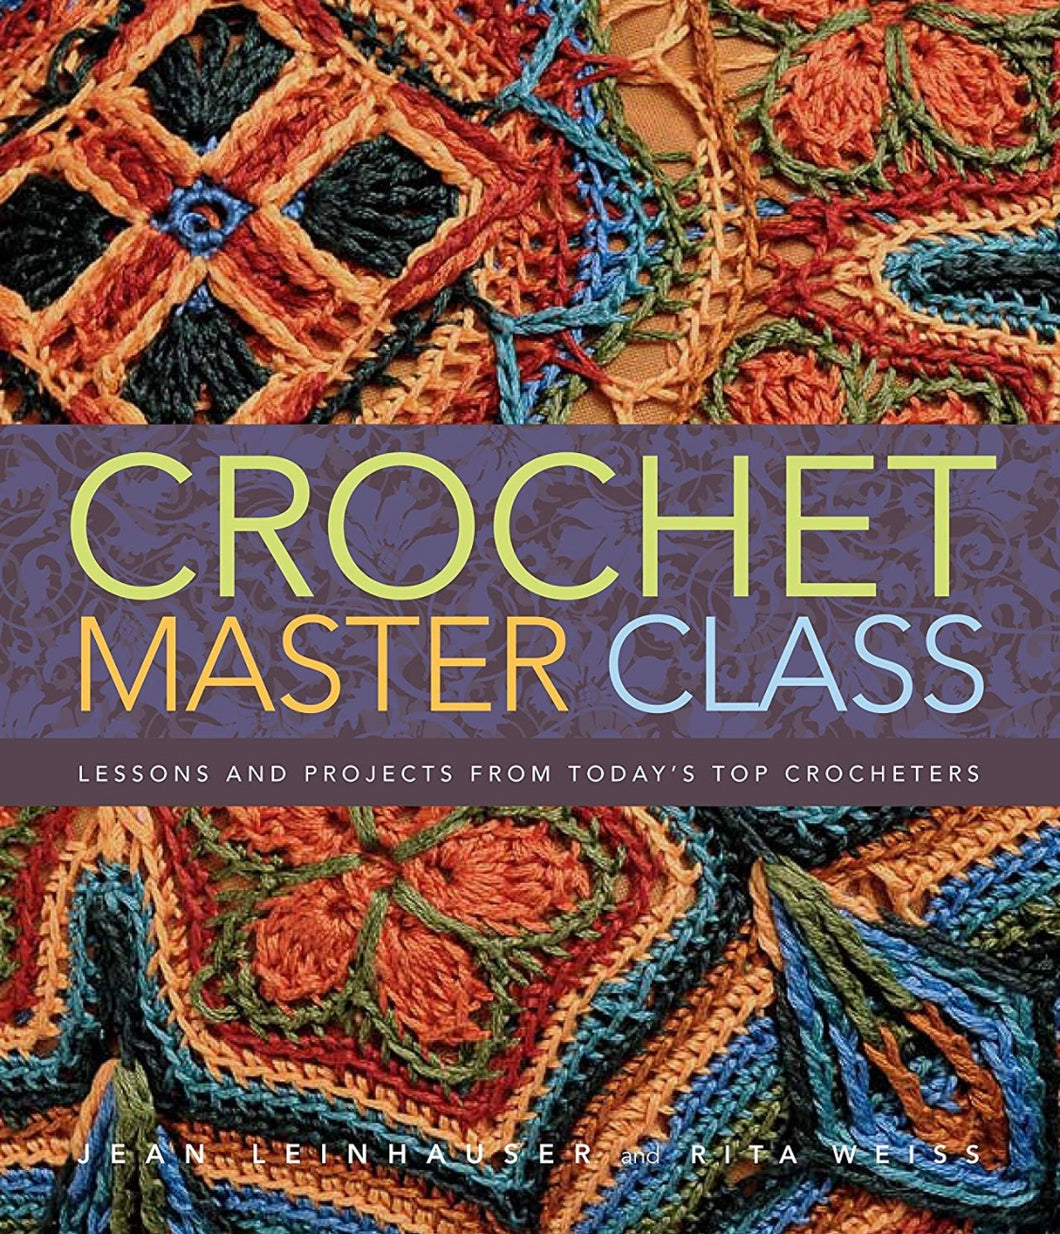 CROCHET BOOK:  Crochet Master Class:  Lessons and Projects from Today's Top Crocheters by Jean Leinhauser and Rita Weiss